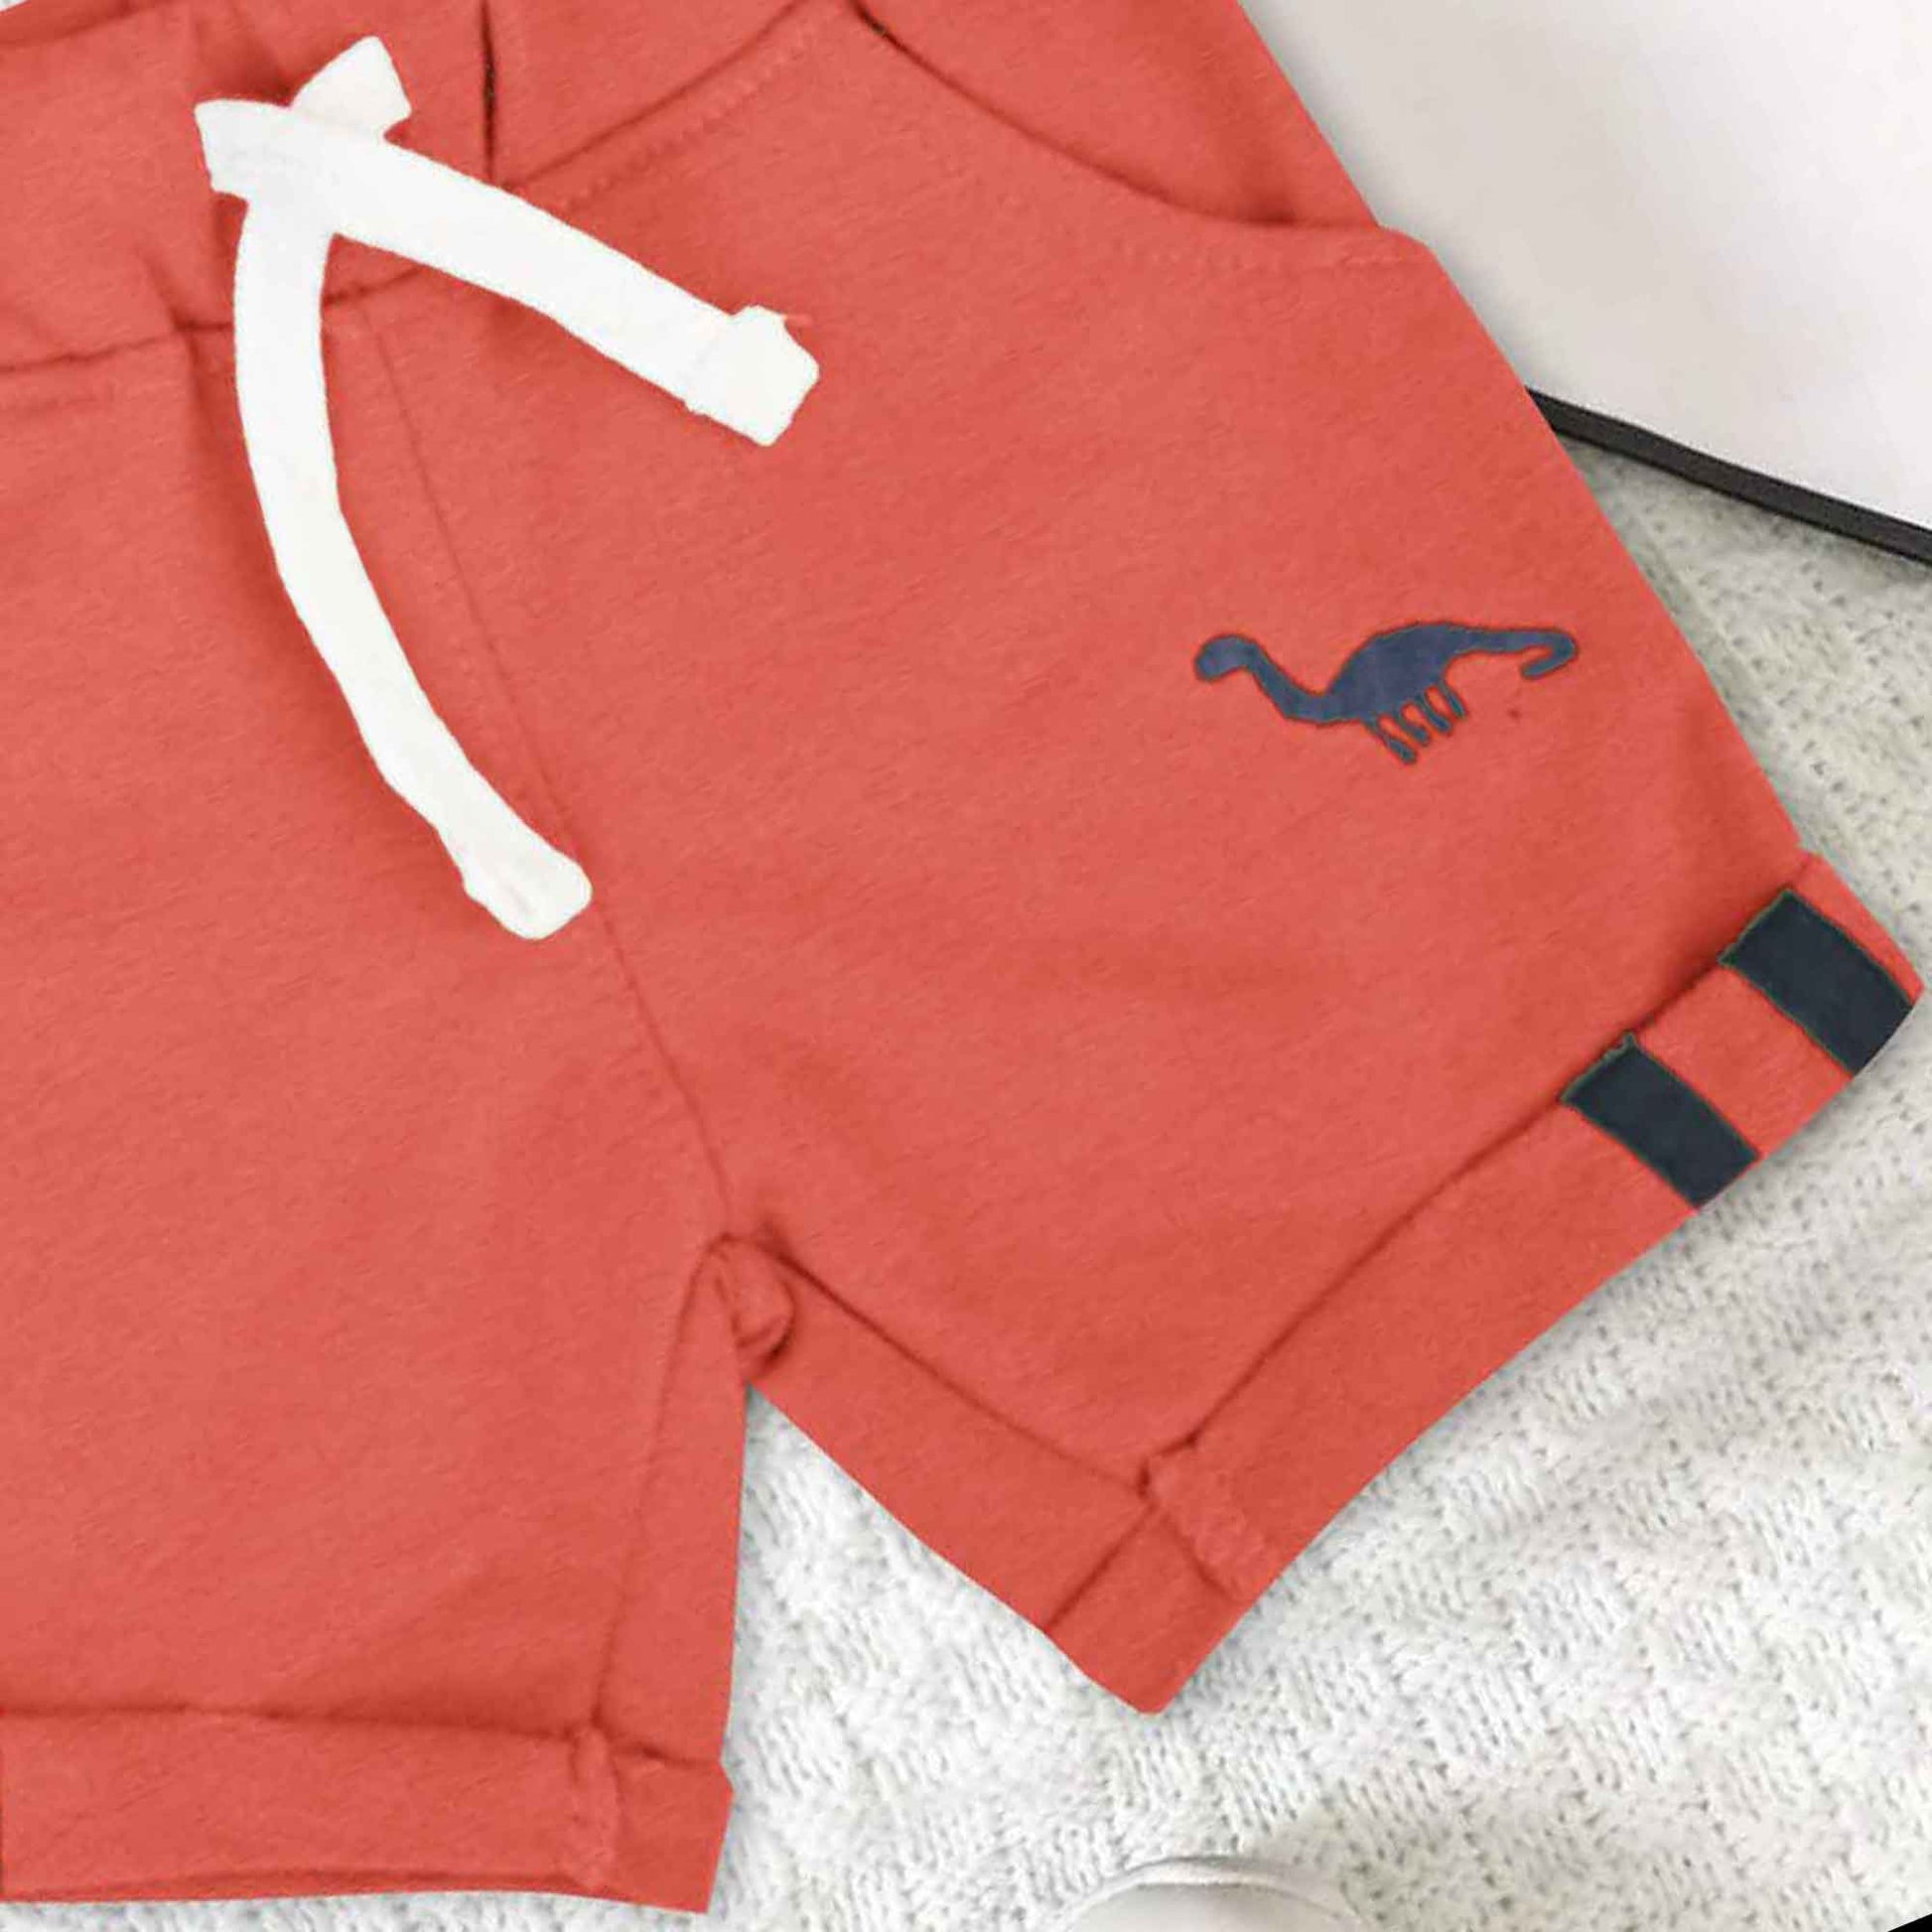 Lefties Kid's Dinosaur Embroidered Terry Shorts